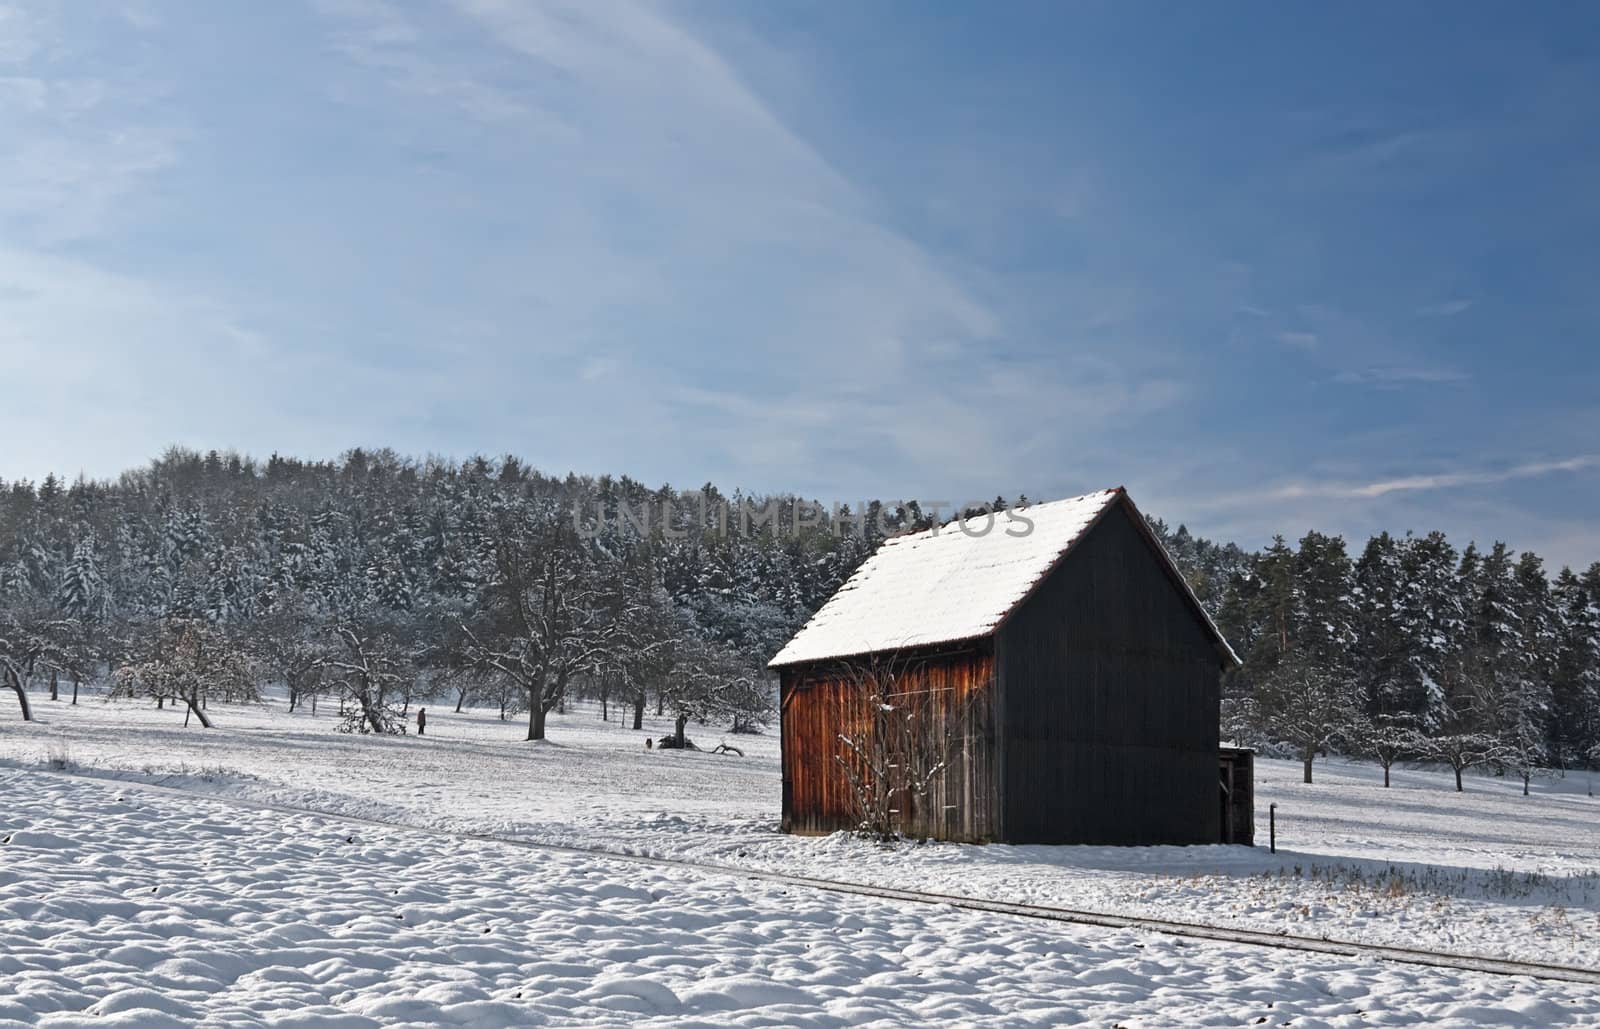 This image shows a cabin in winter